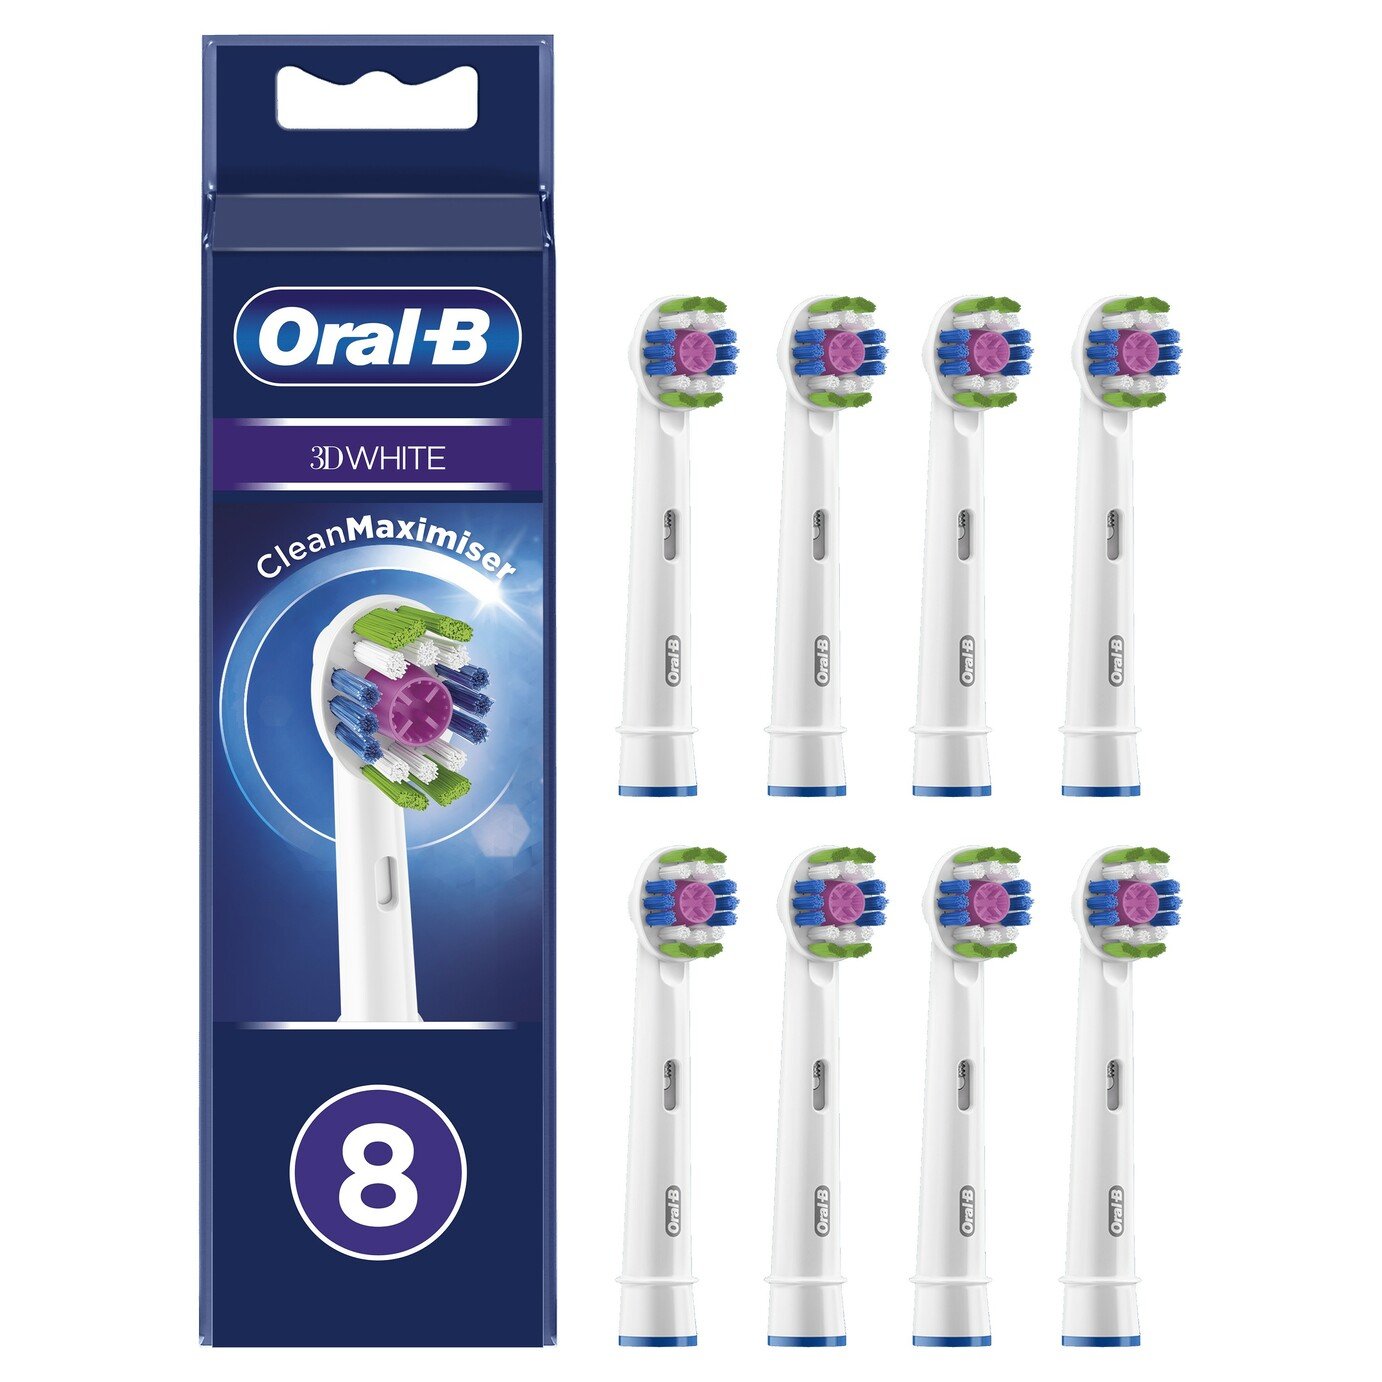 Oral-B 3D White Electric Toothbrush Heads - 8 Pack